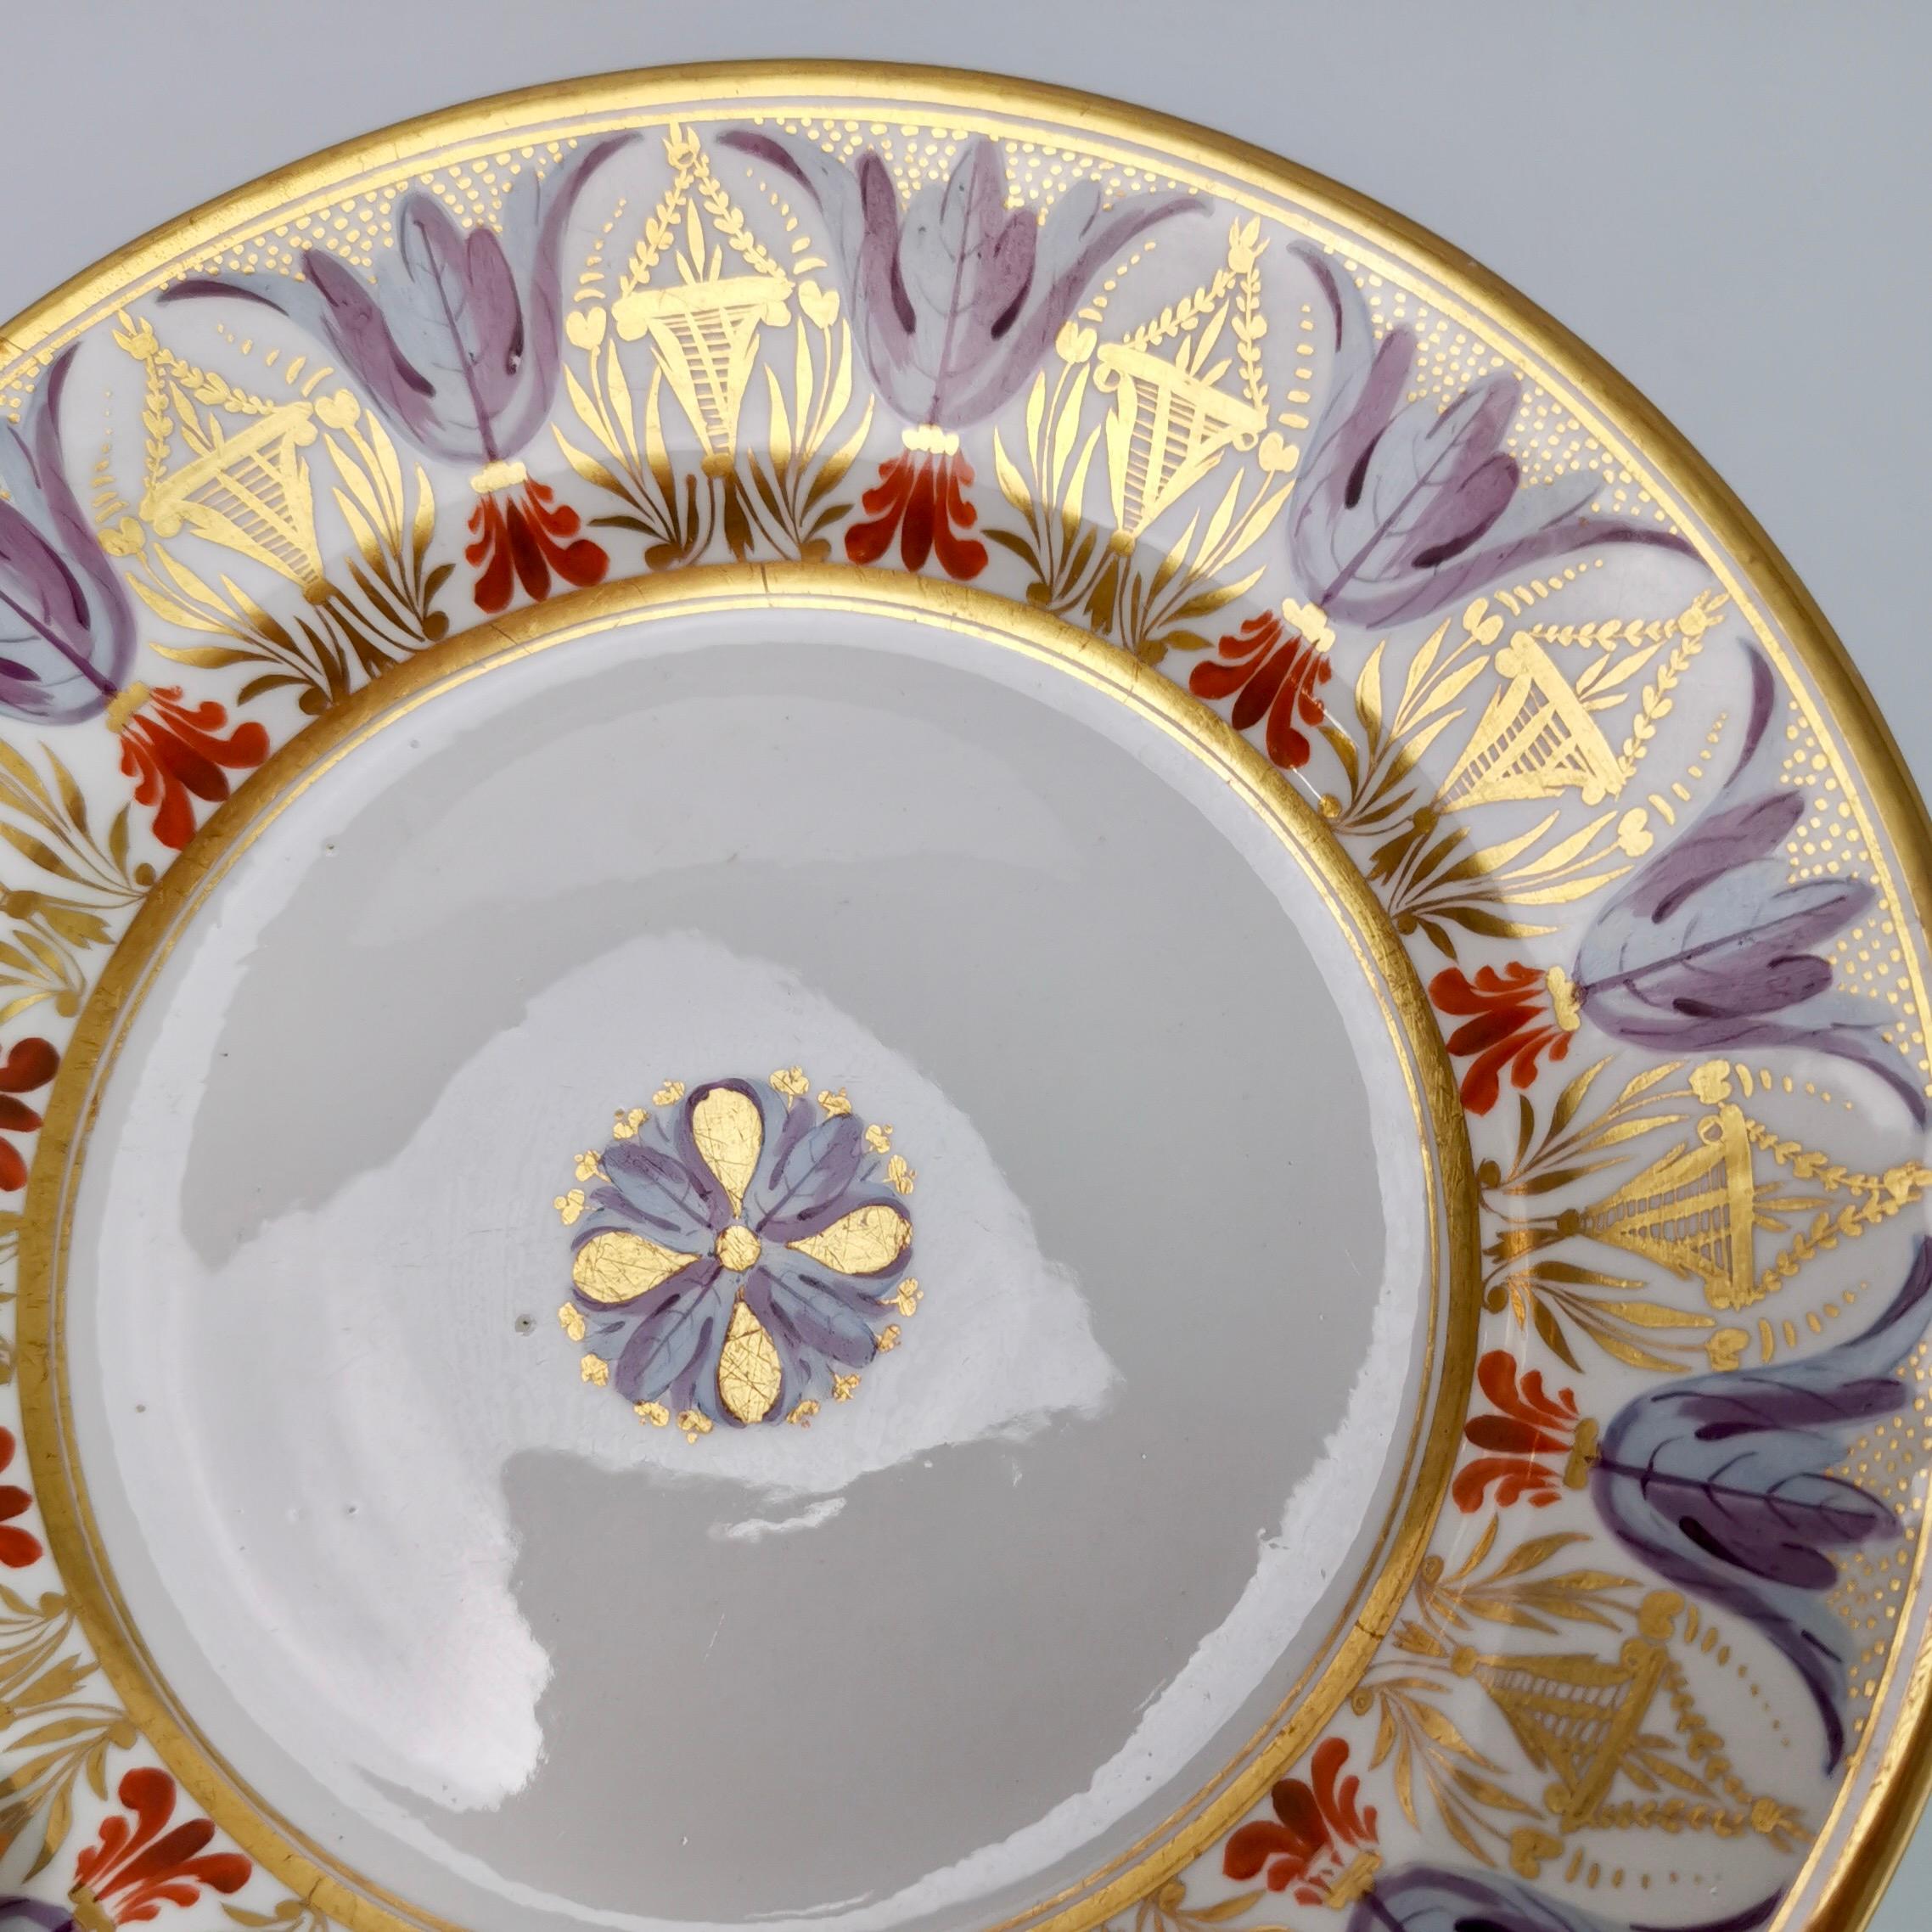 Early 19th Century Bloor Derby Dessert Plate, Neoclassical Pattern, 1815-1820 '1'